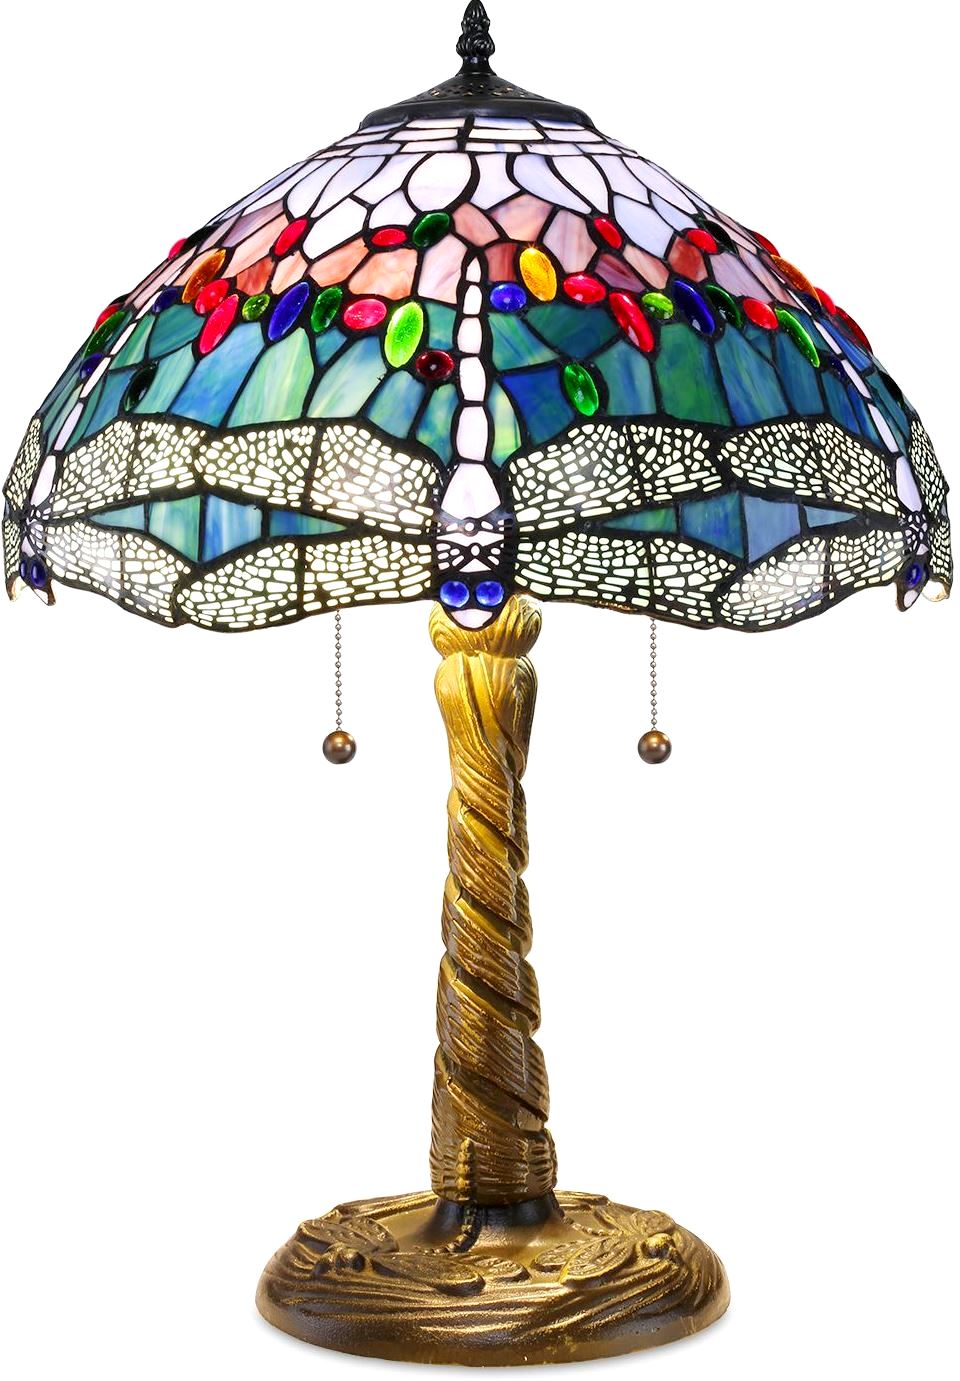 White Dragonflies Tiffany Lamp 21"H - SOLD